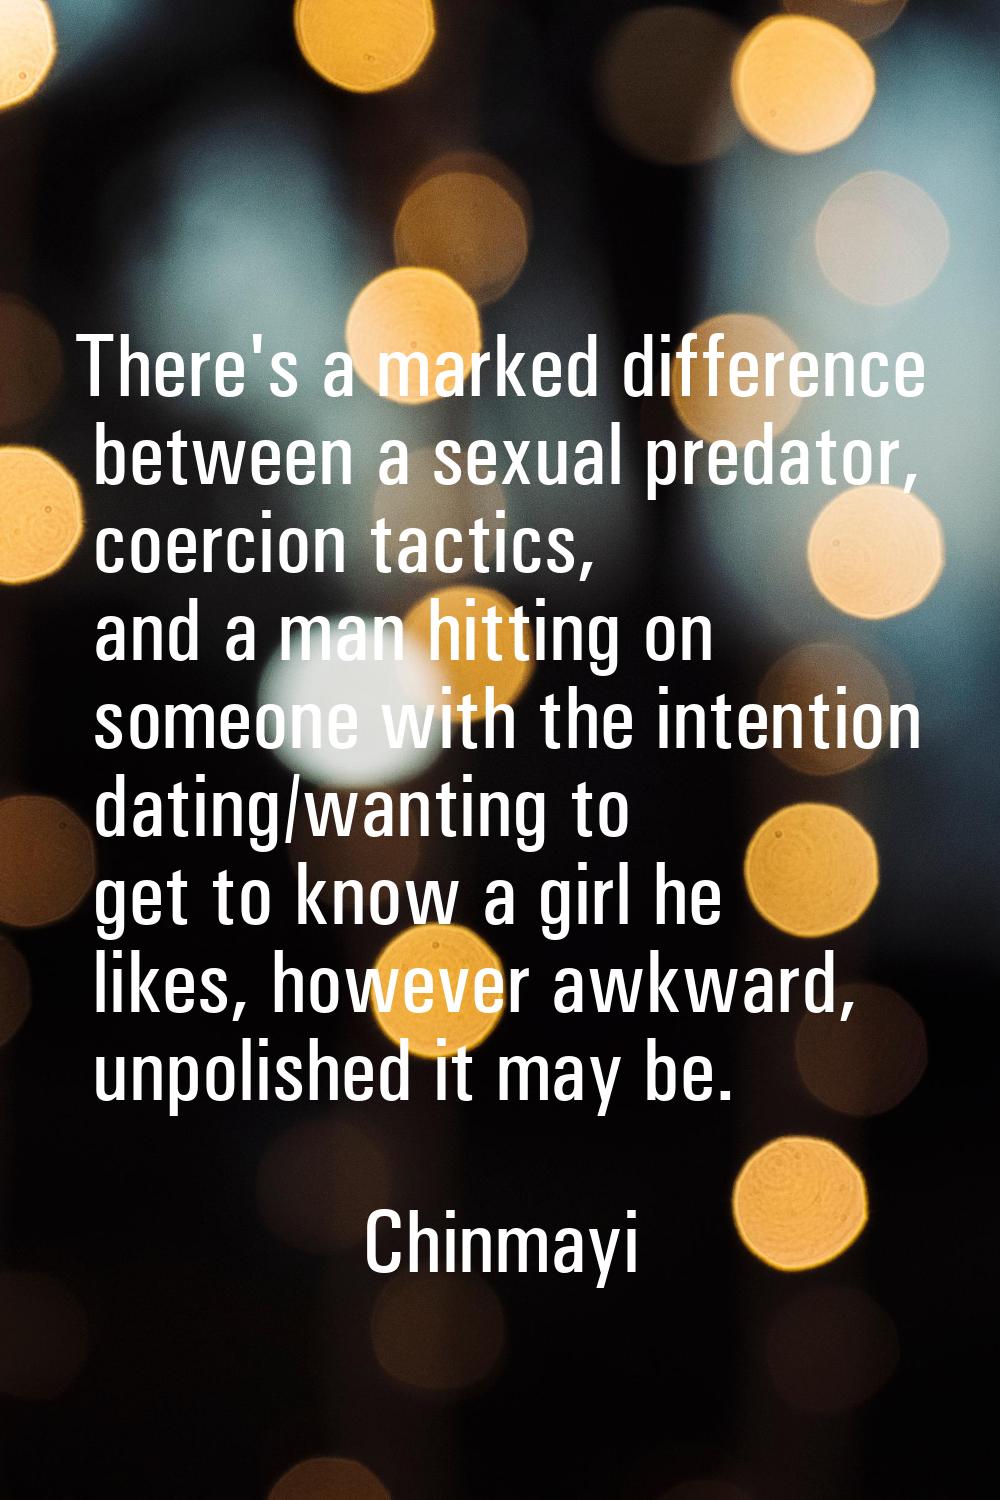 There's a marked difference between a sexual predator, coercion tactics, and a man hitting on someo